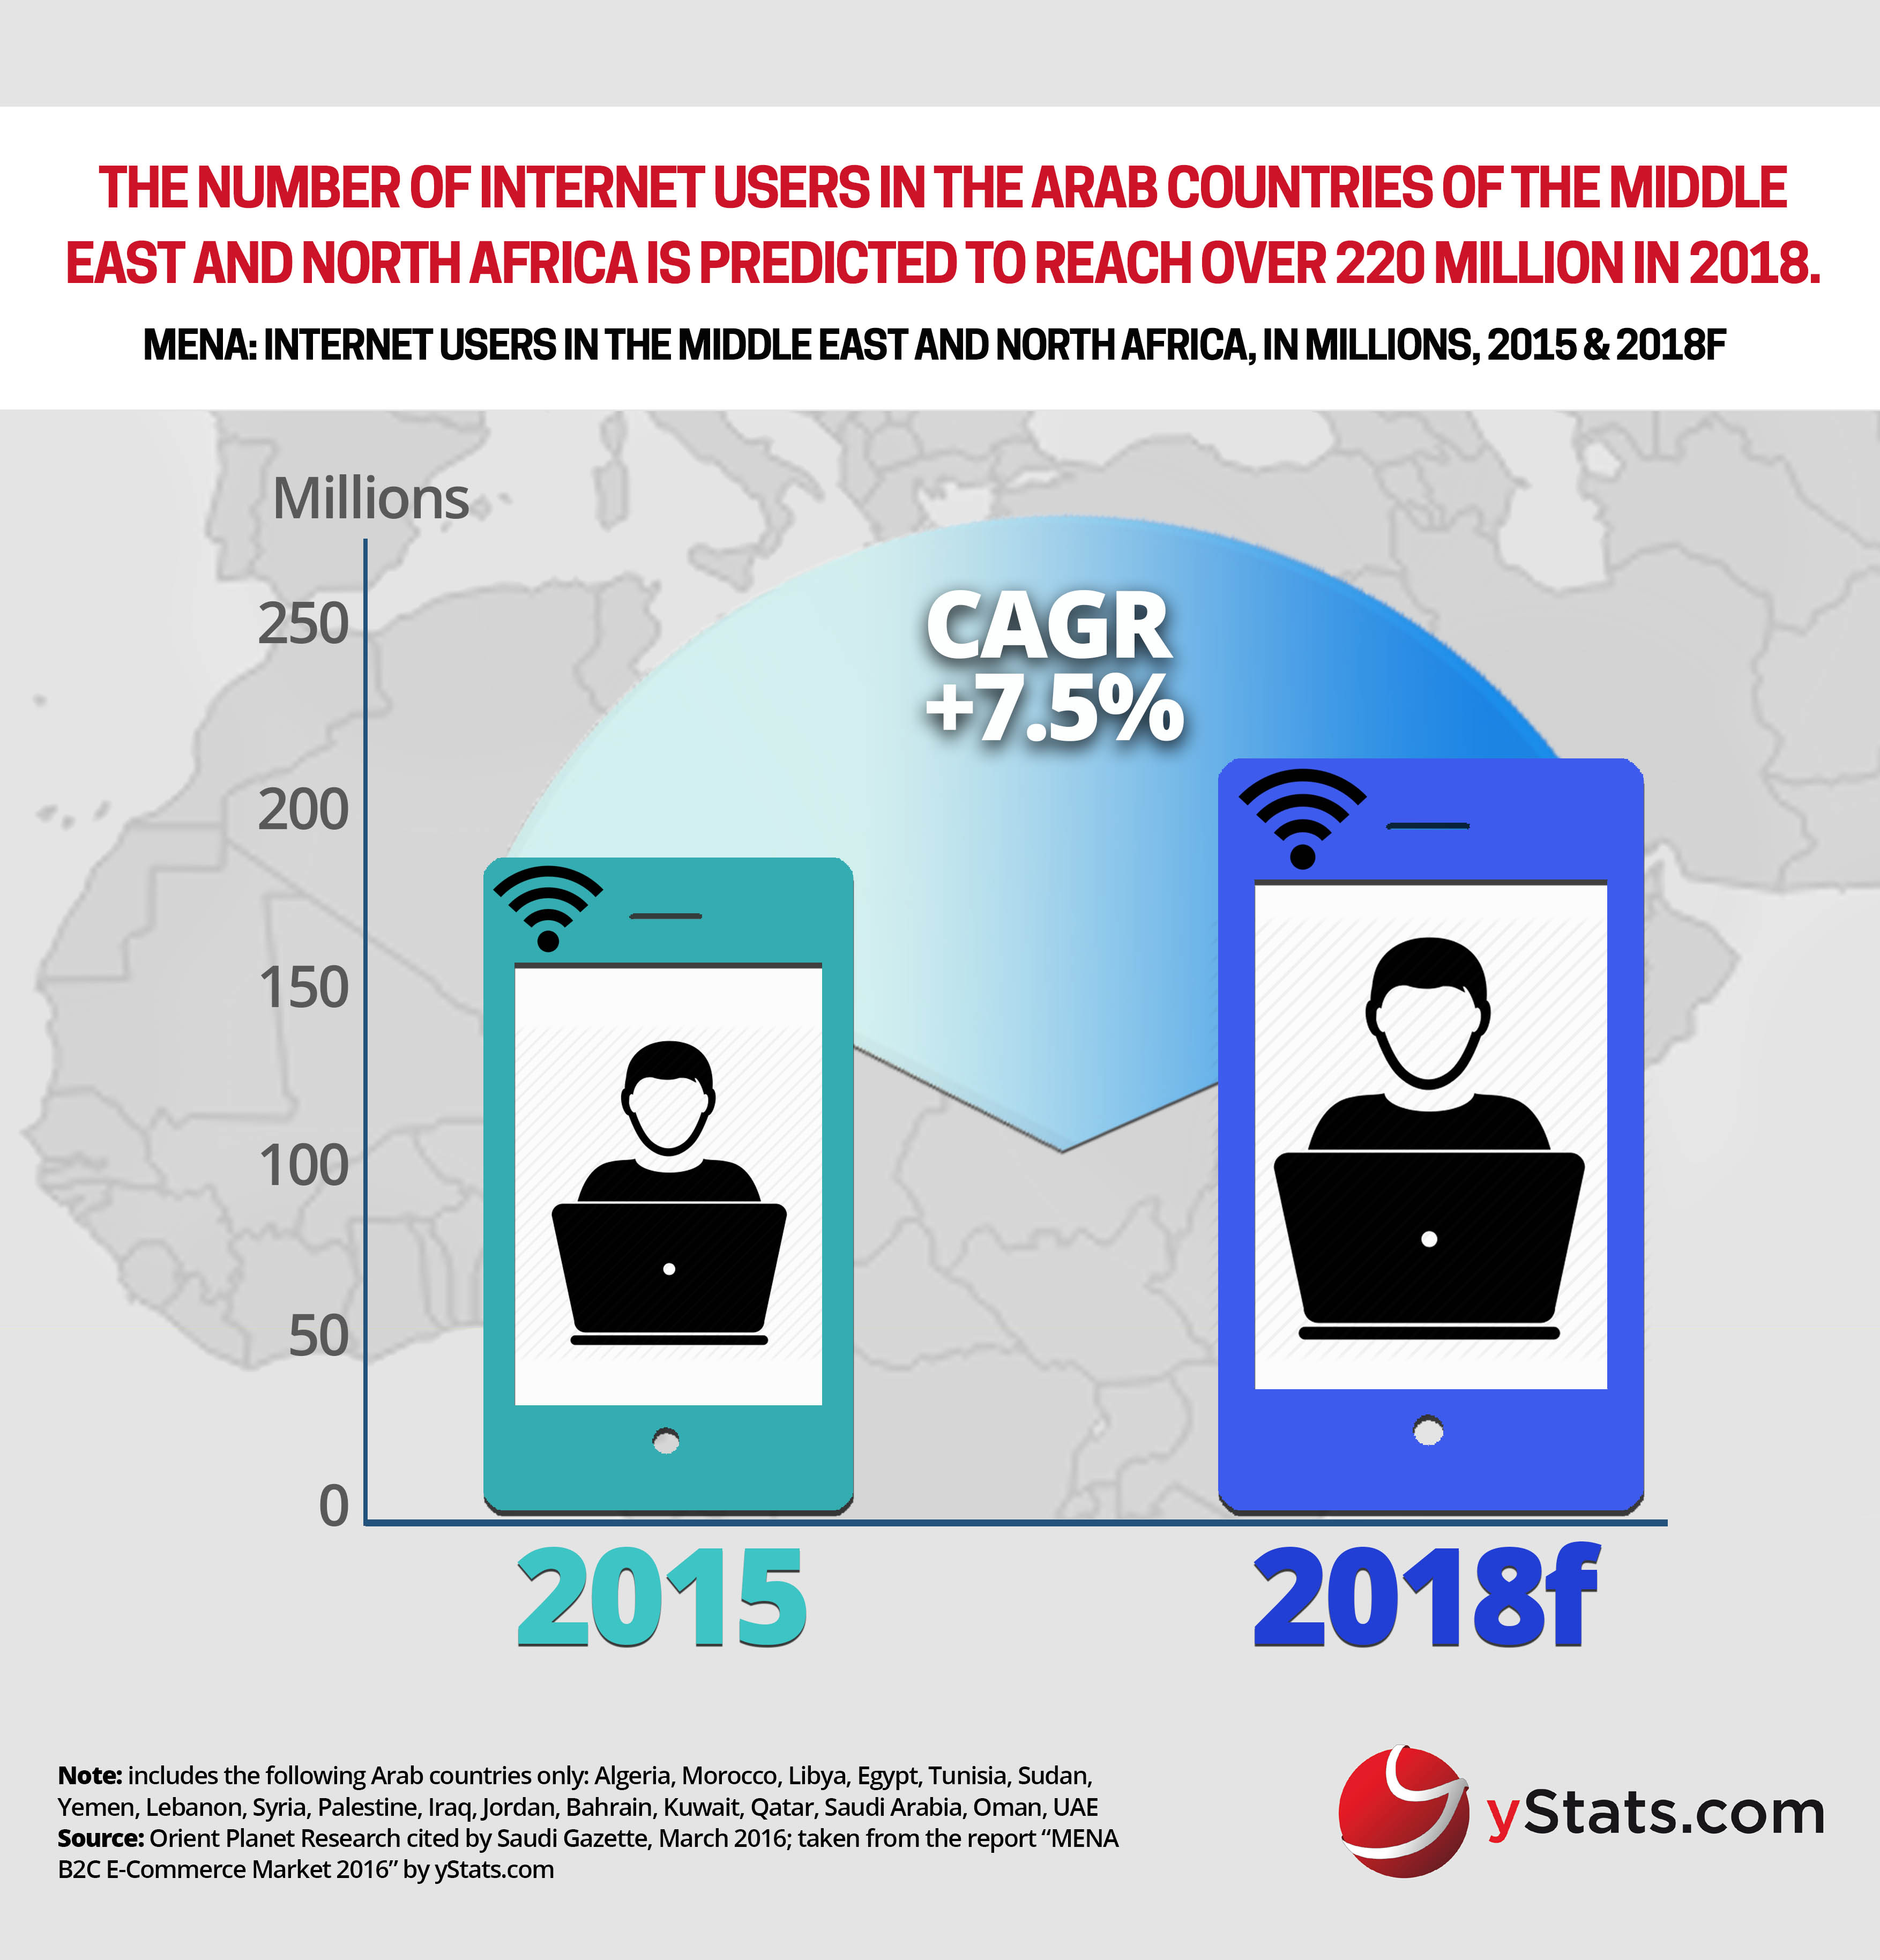 internet users in the middle east and north africa